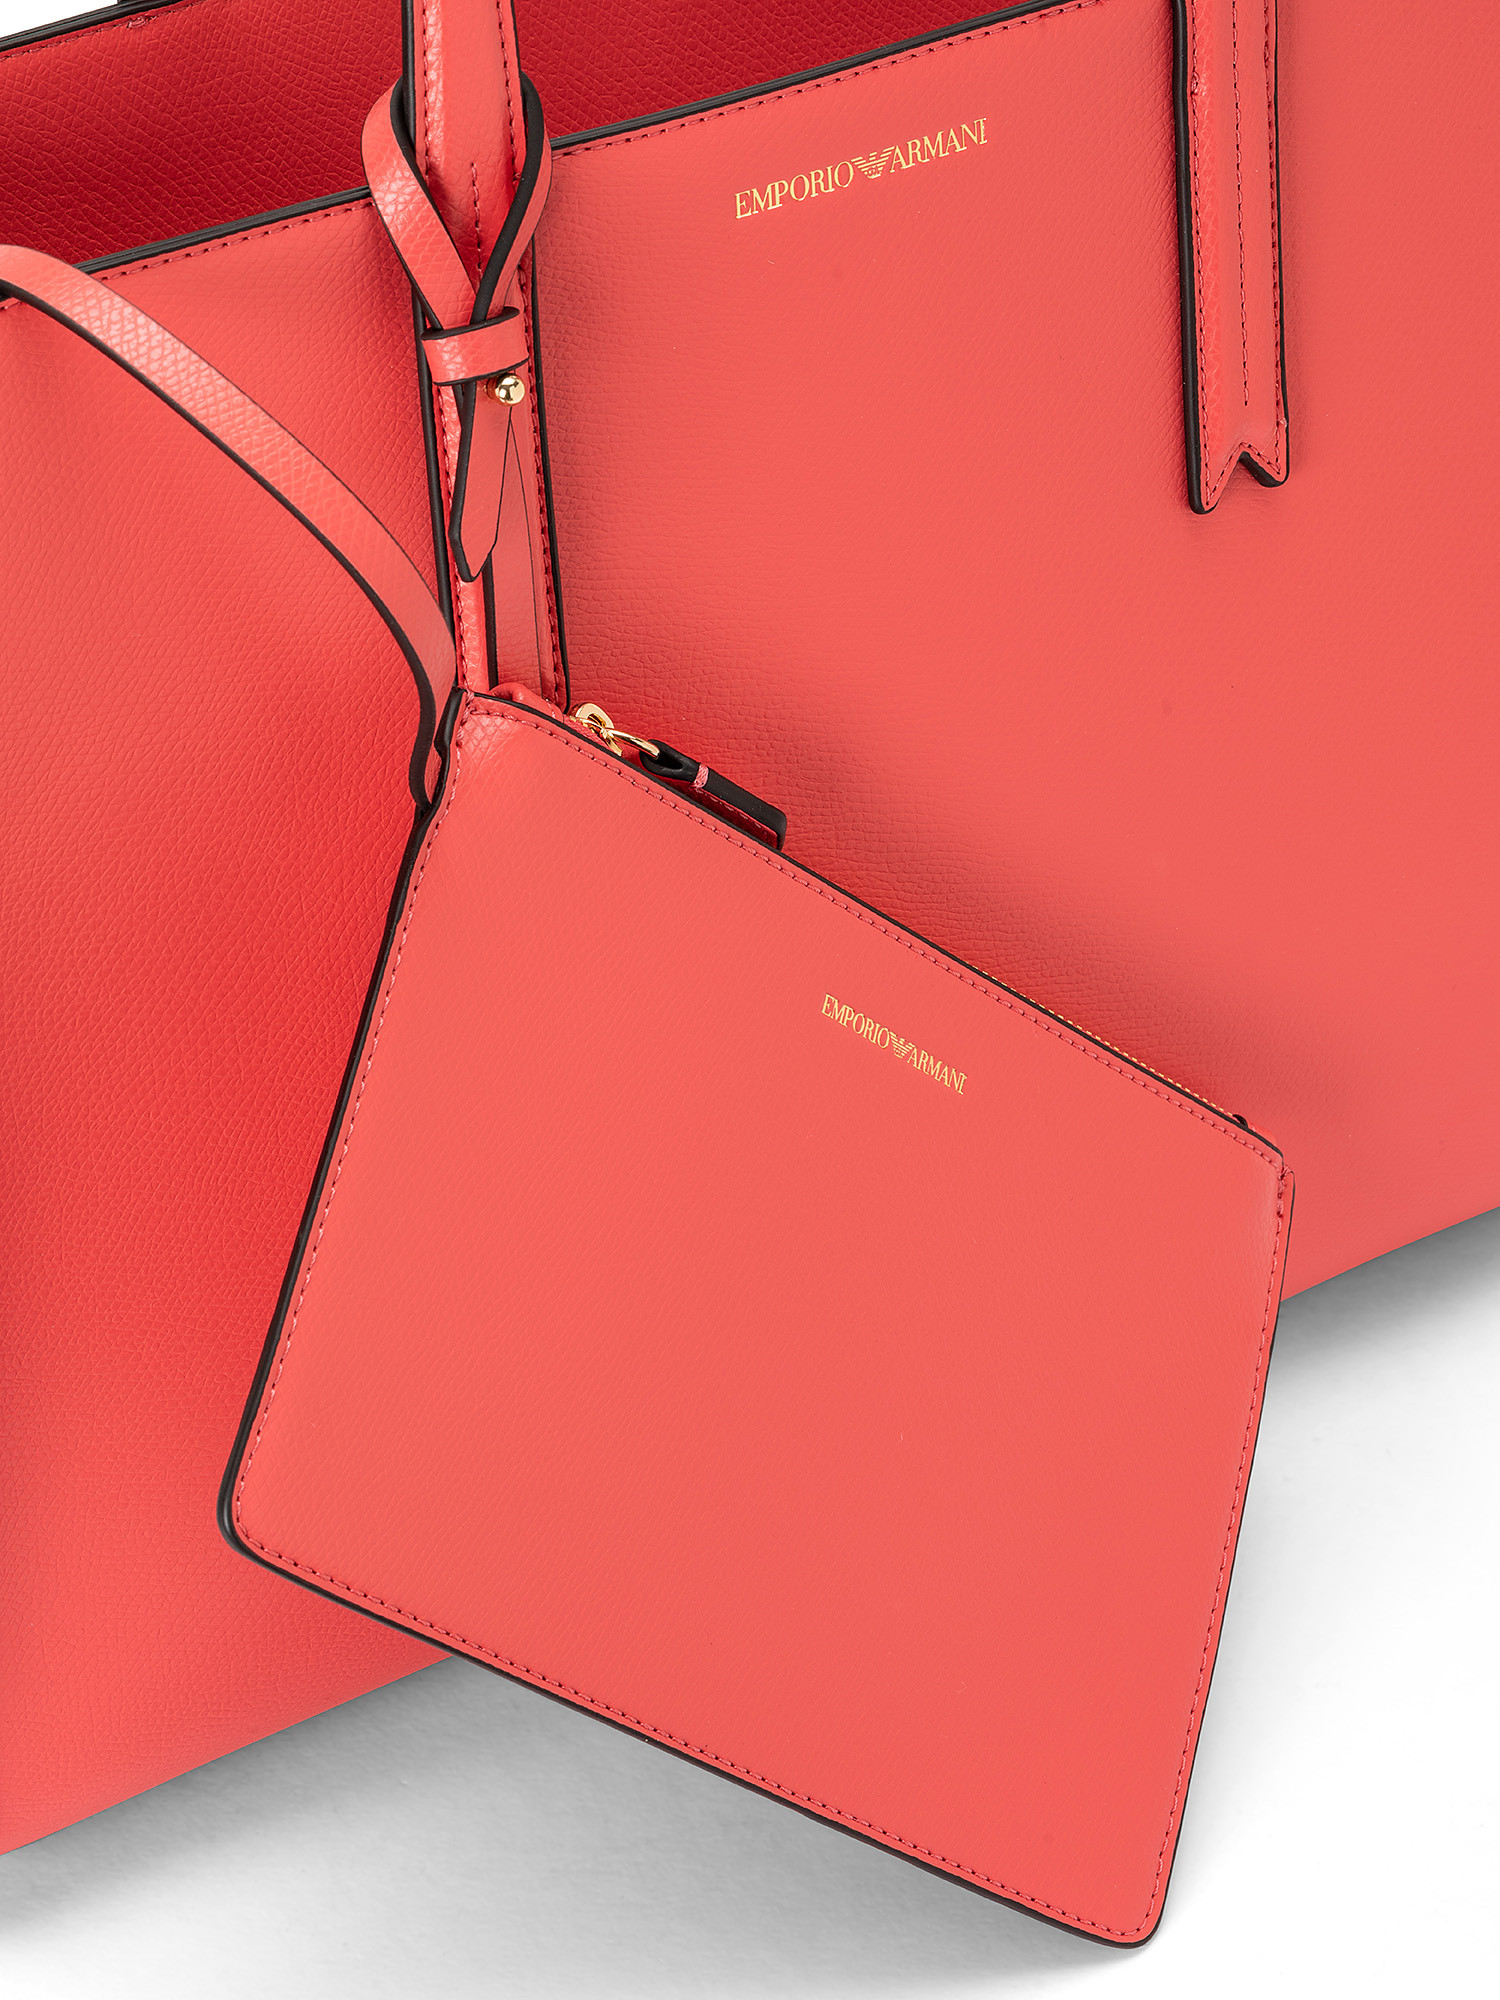 Shopping bag, Rosso corallo, large image number 2